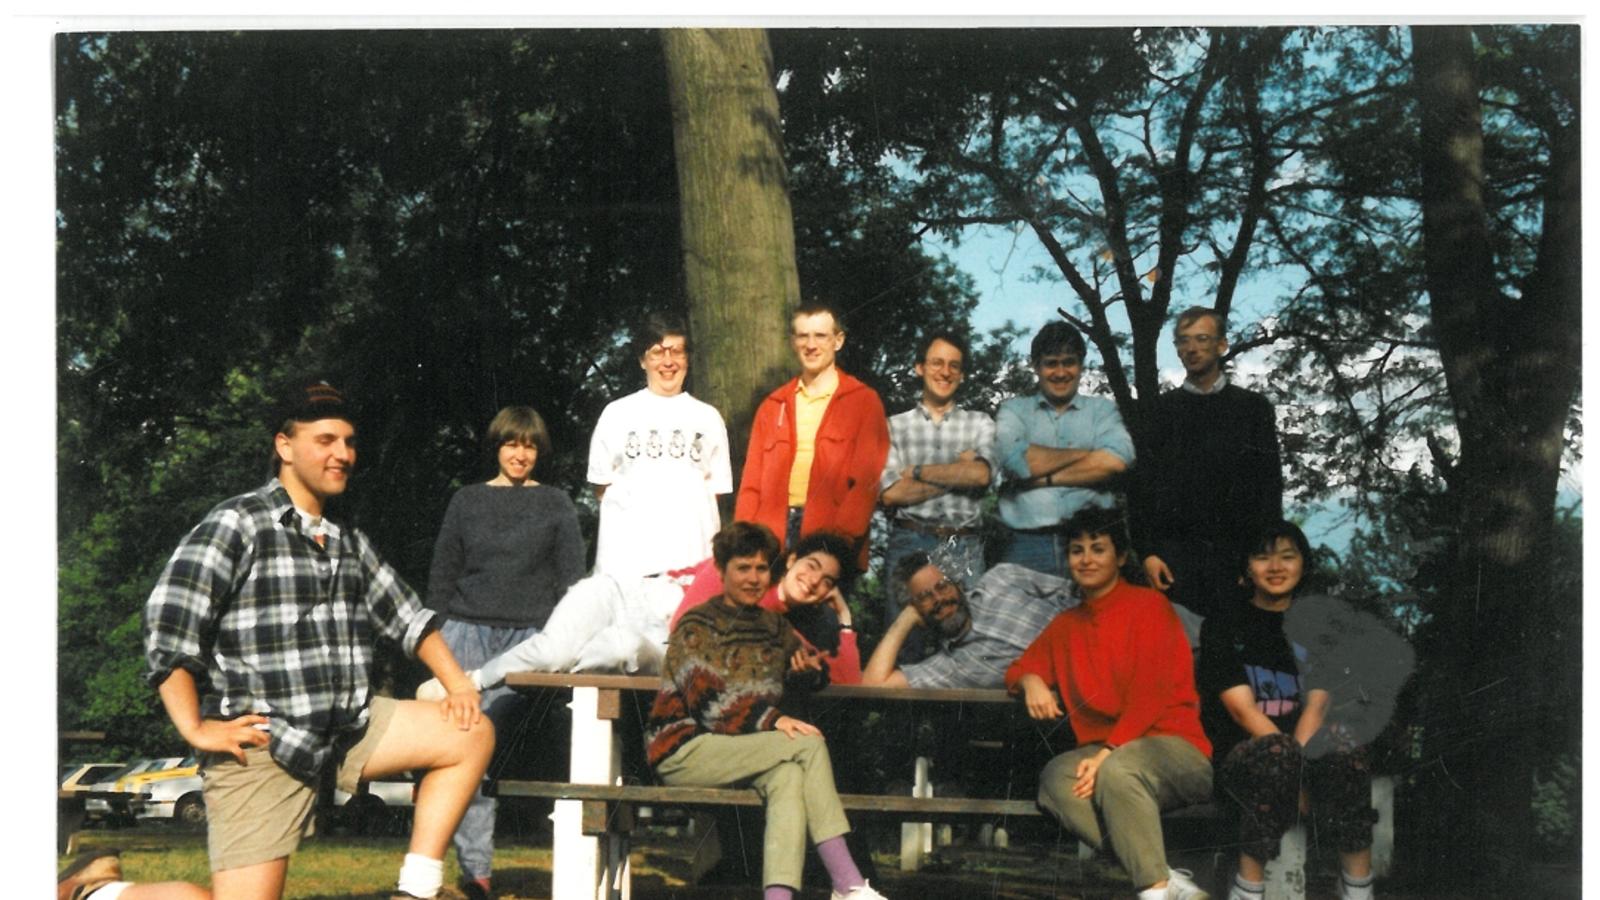 A group of researchers stands around a picnic table with trees in the background